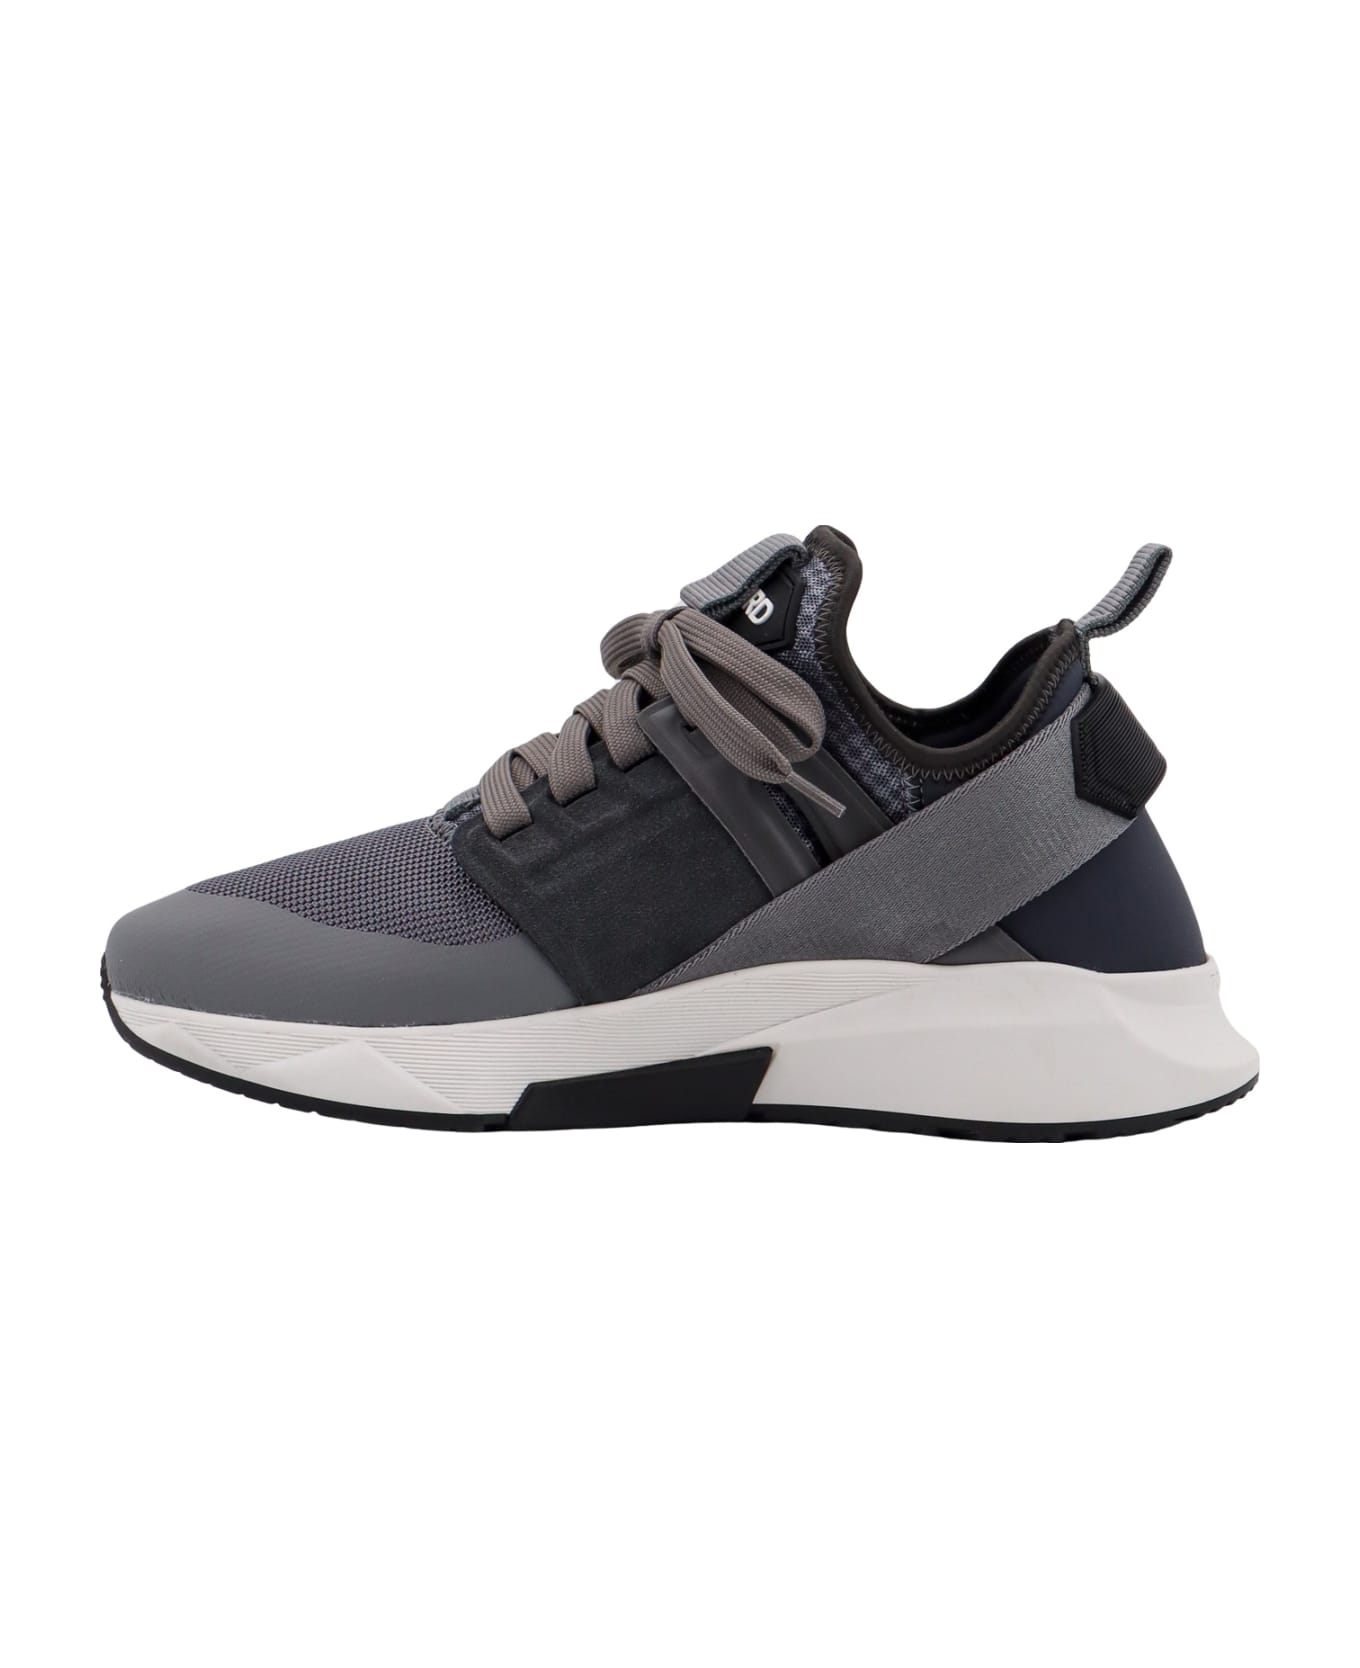 Tom Ford Jago Sneakers - Grey